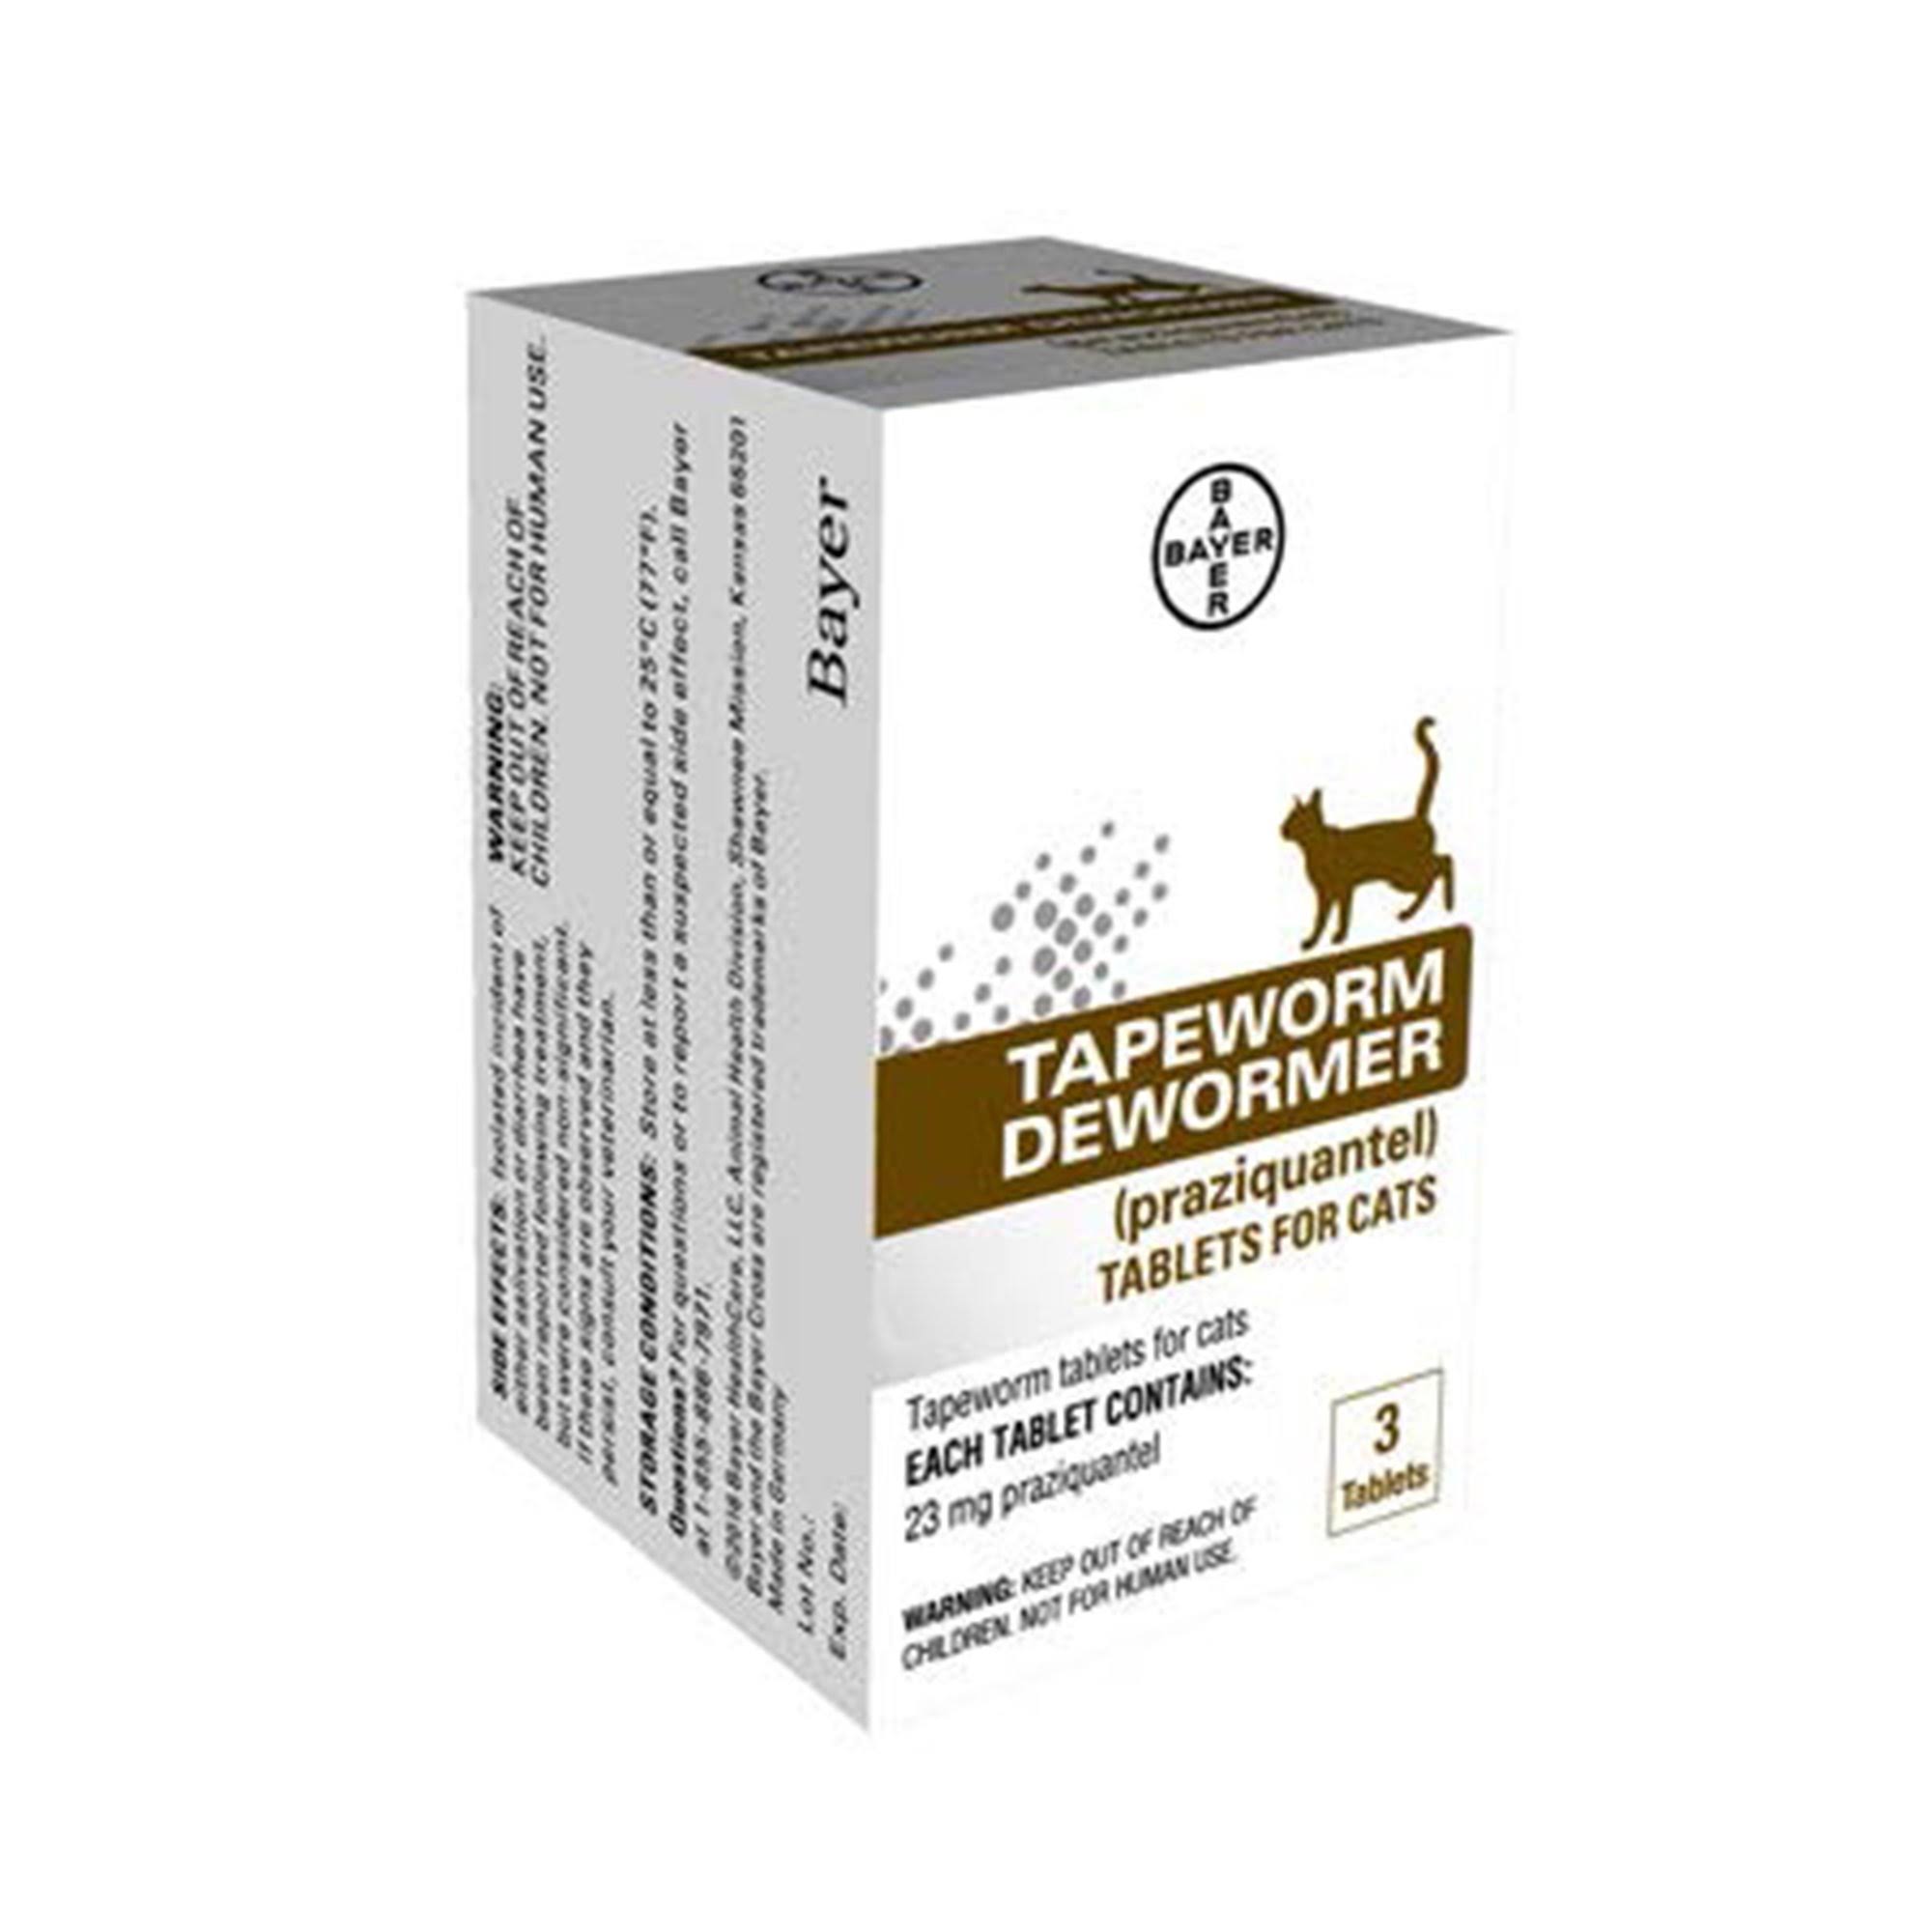 Bayer Tapeworm Dewormer Praziquantel Tablets for Cats - 23mg